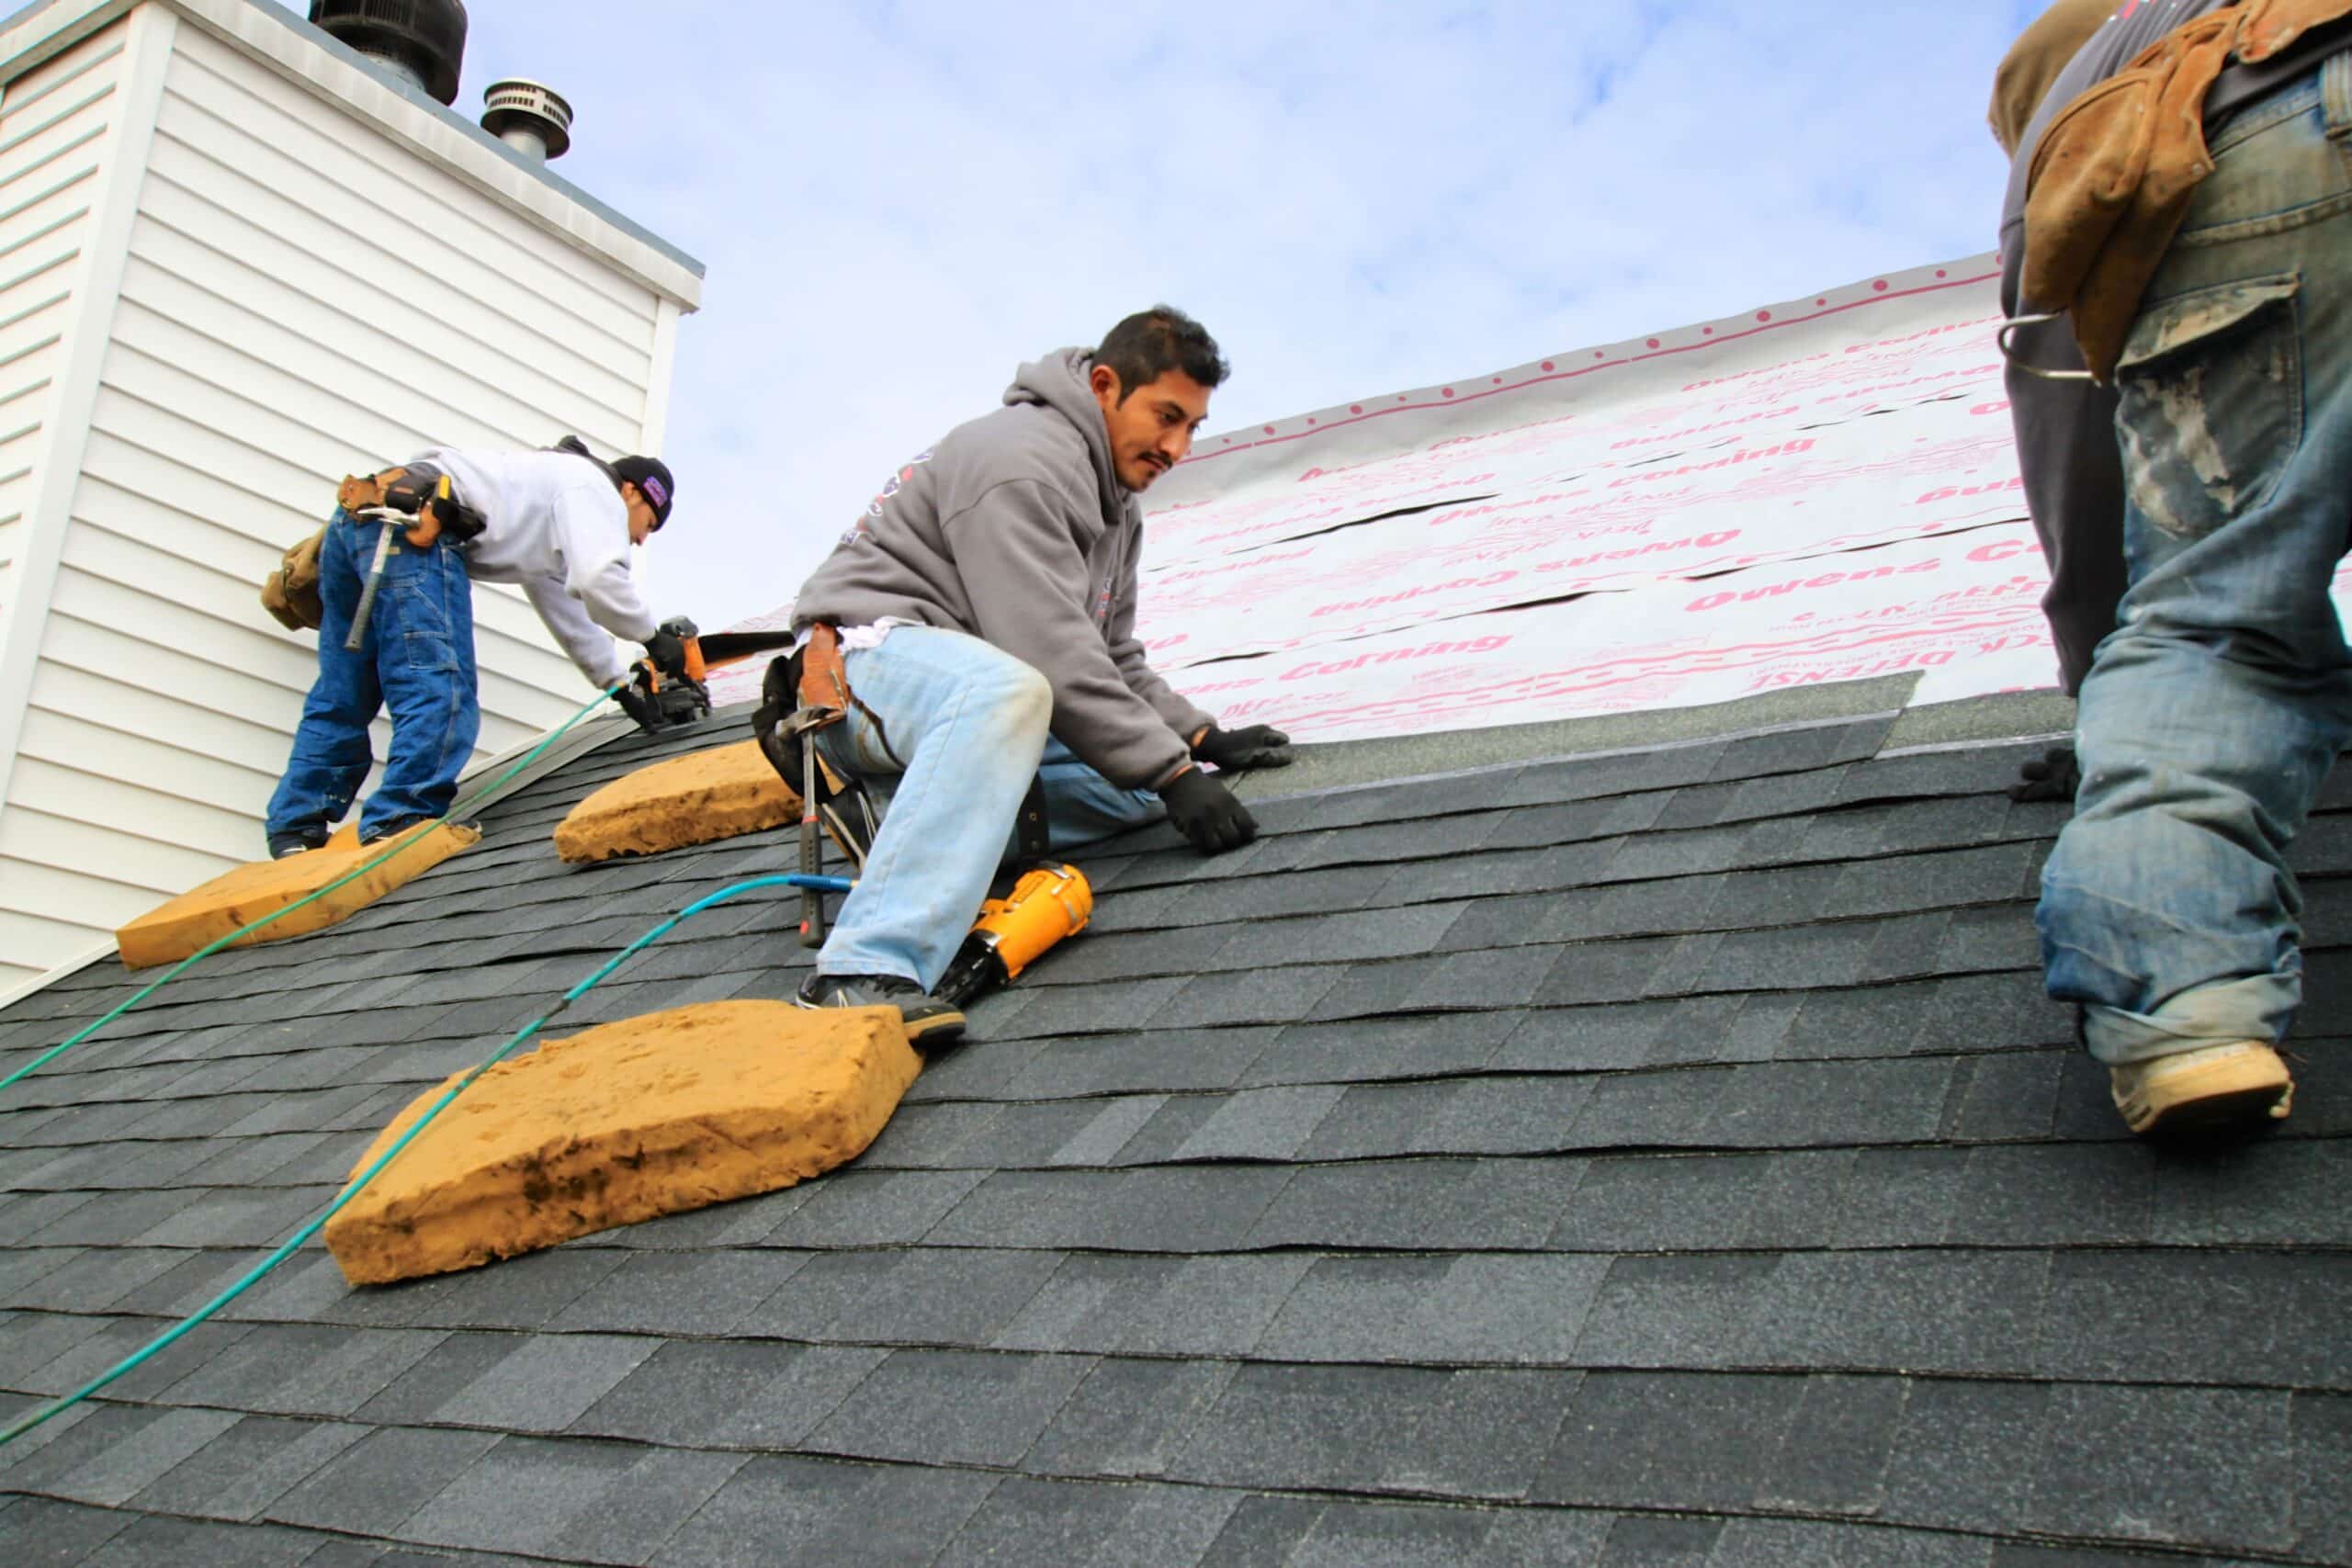 Men working on the roof of a large house